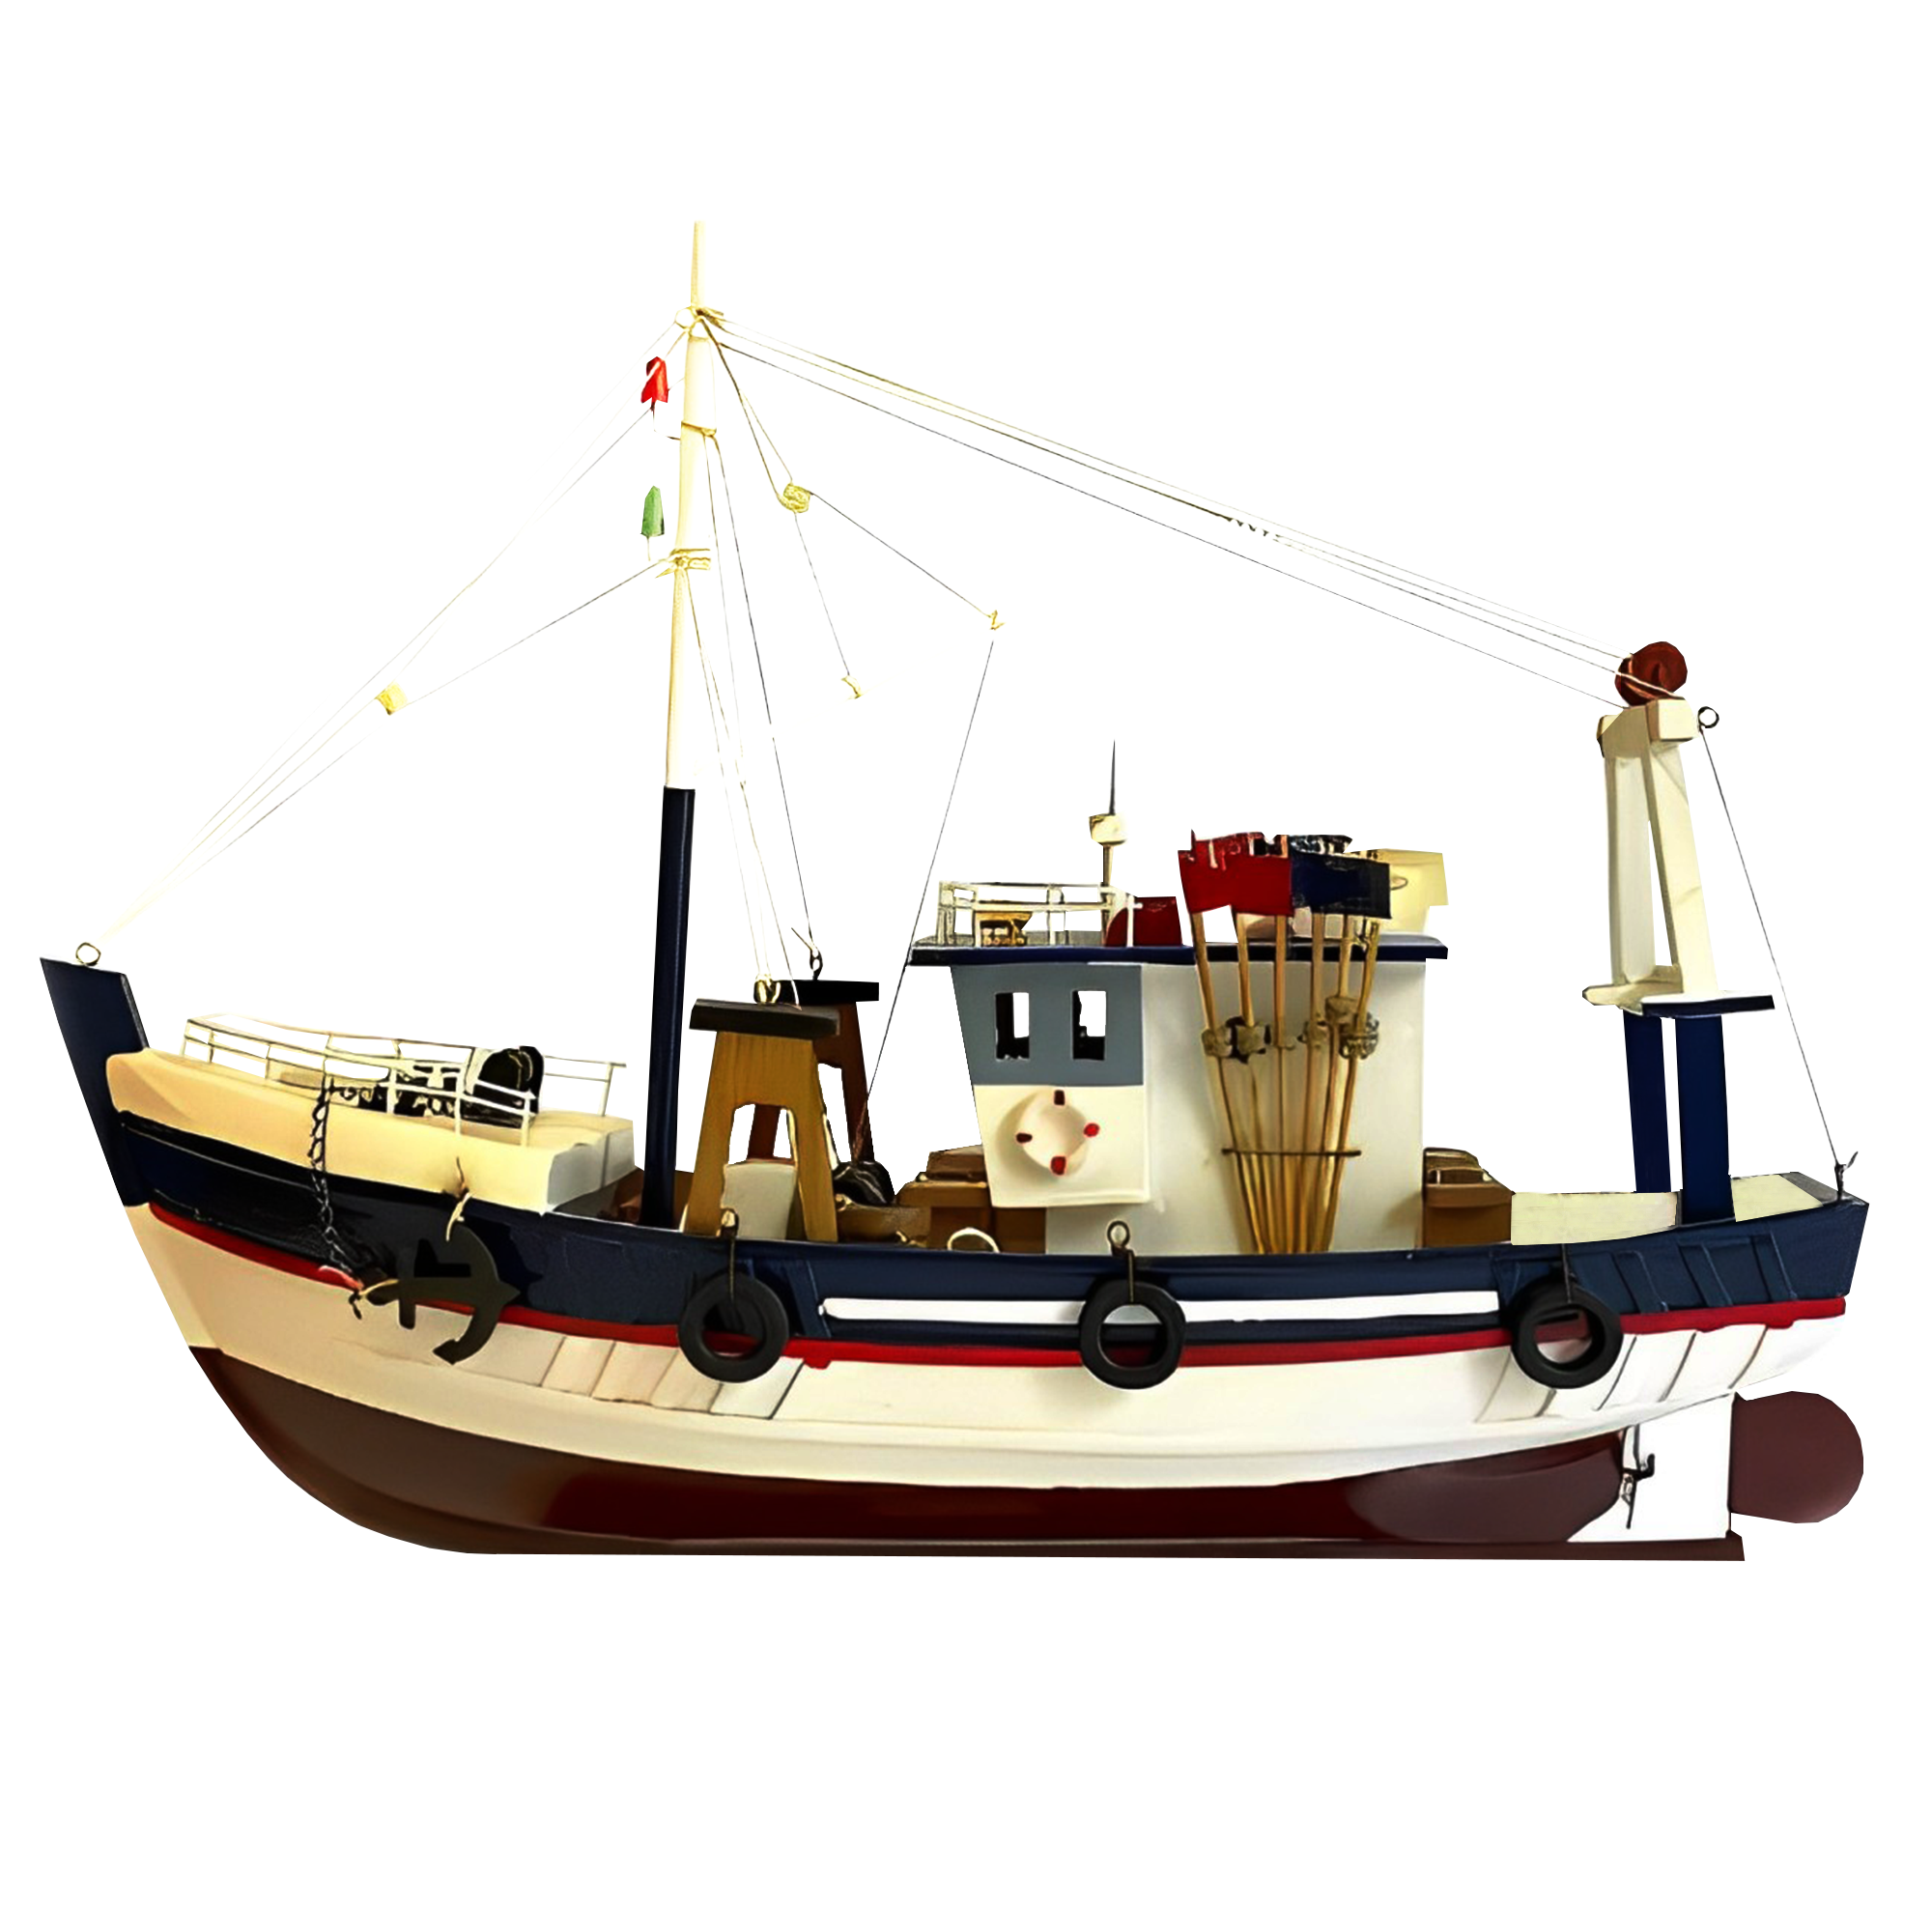 Modern Woodcraft Outdoor Decor Fishing Boat | Nimton Sales and ...